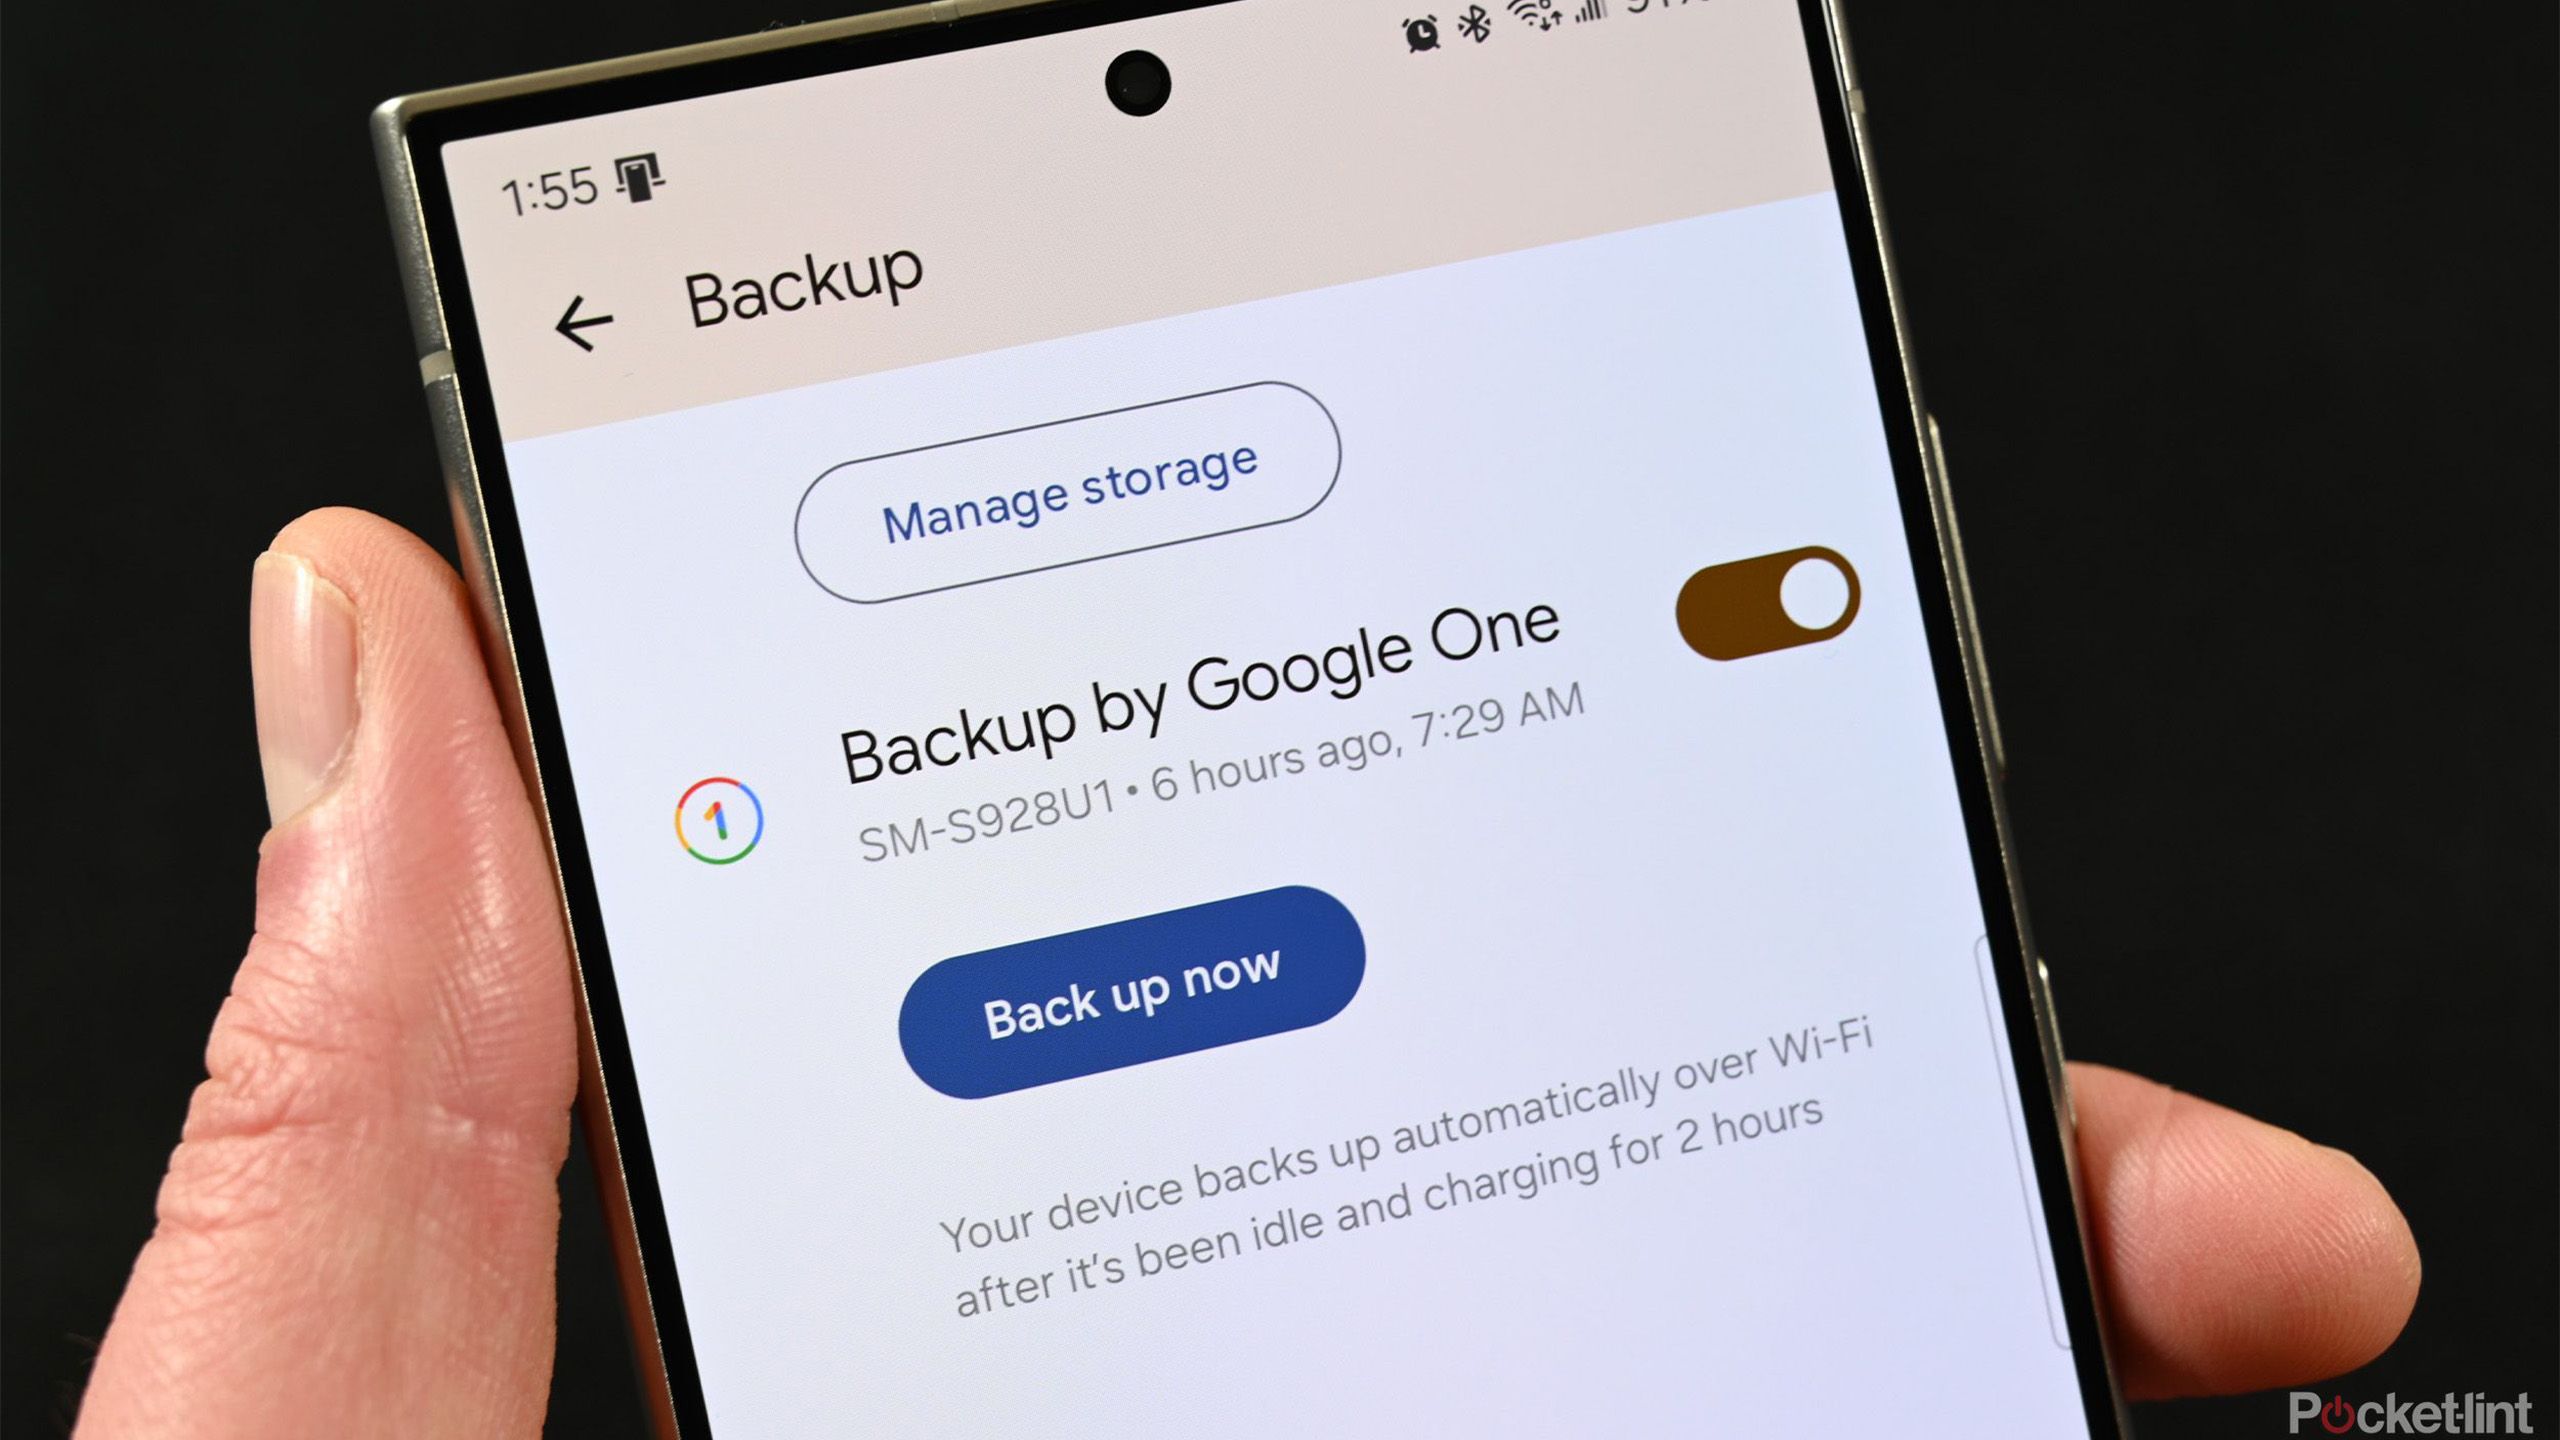 Backup by Google One-1